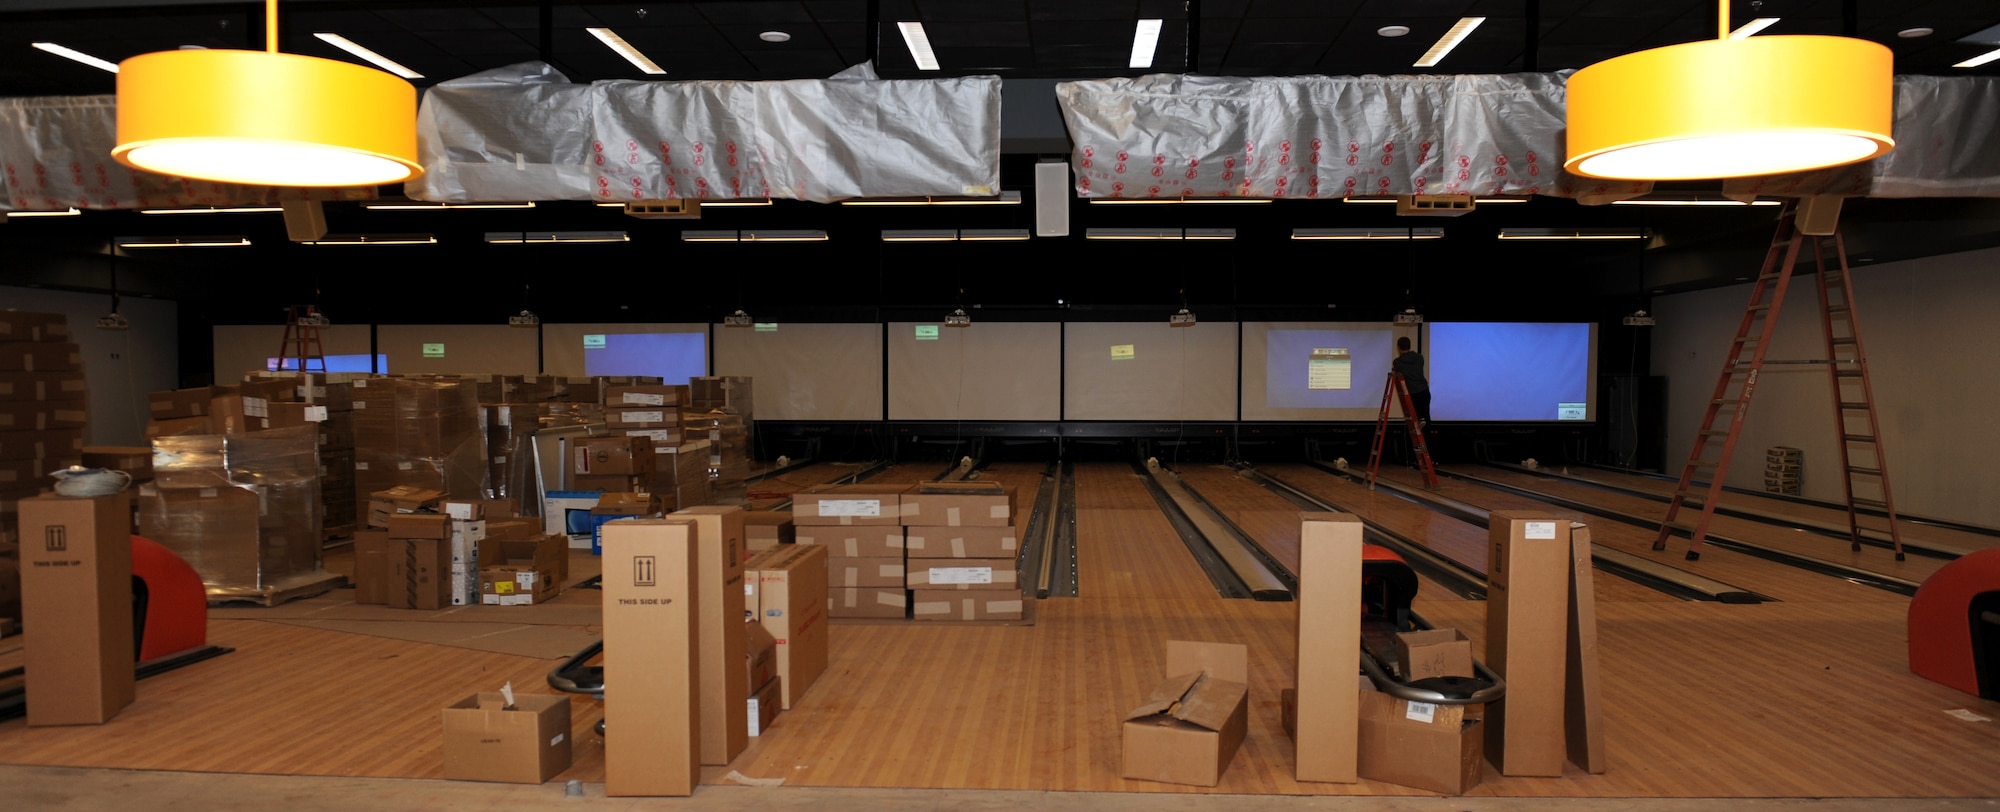 Building supplies sit atop the new Whiteman Bowling Center lanes at Whiteman Air Force Base, Mo., Feb. 23, 2016. Upon completion, the new Bowling Center will feature 16 lanes and a new entertainment system that will enable users to bowl traditional games or play a variety of modified game sets.
(U.S. Air Force photo by Tech Sgt. Miguel Lara)
